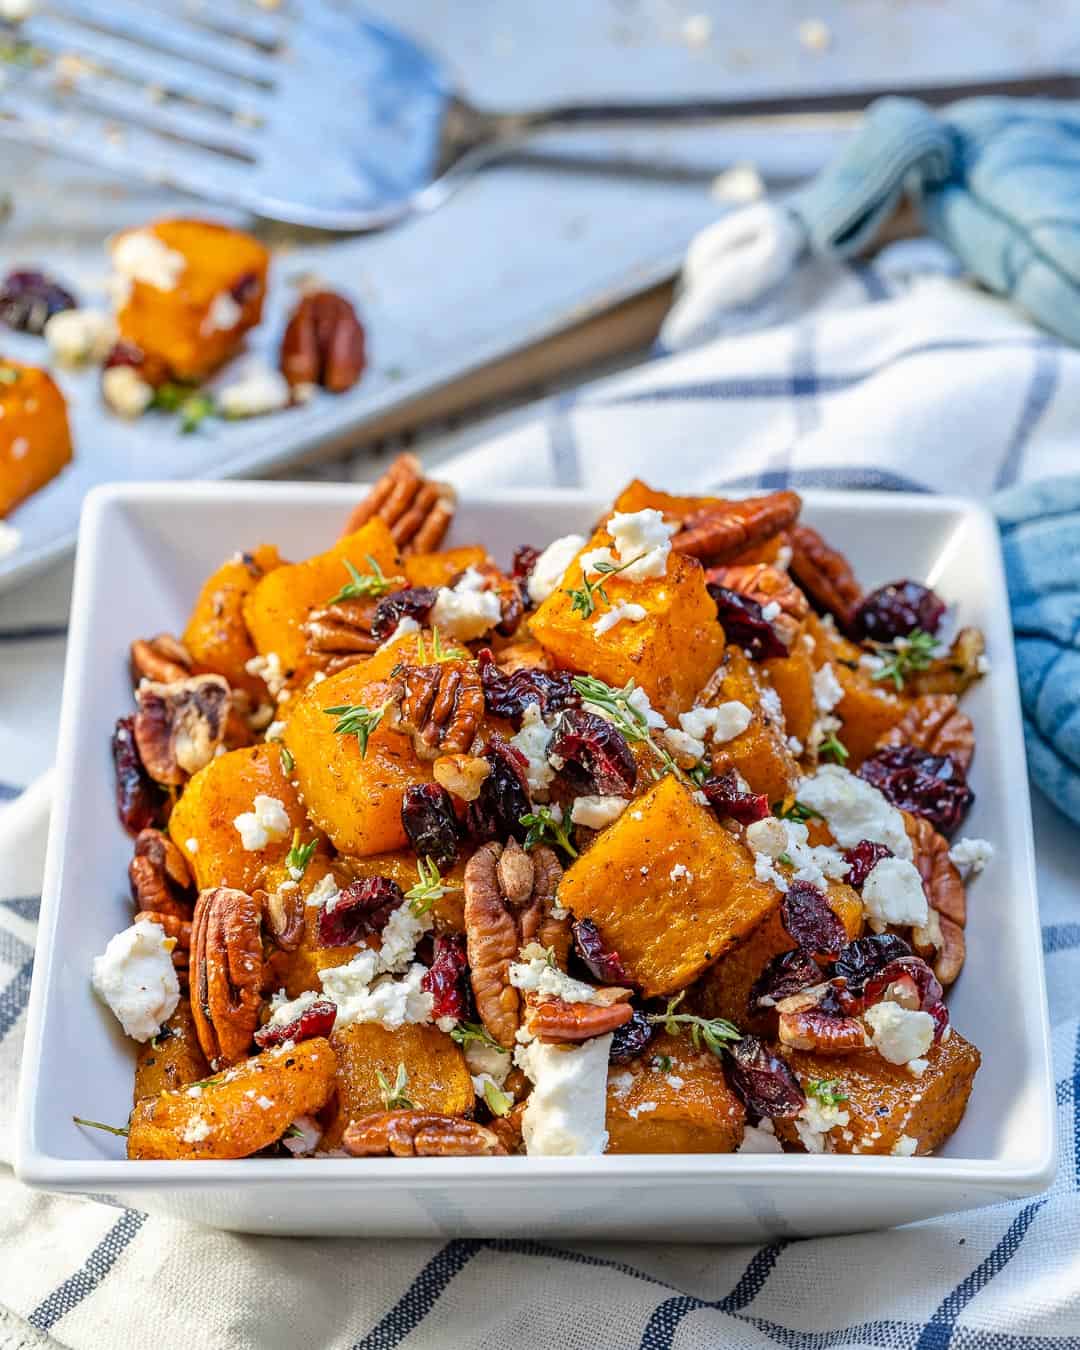  squash recipe with cranberry, feta cheese and pecan